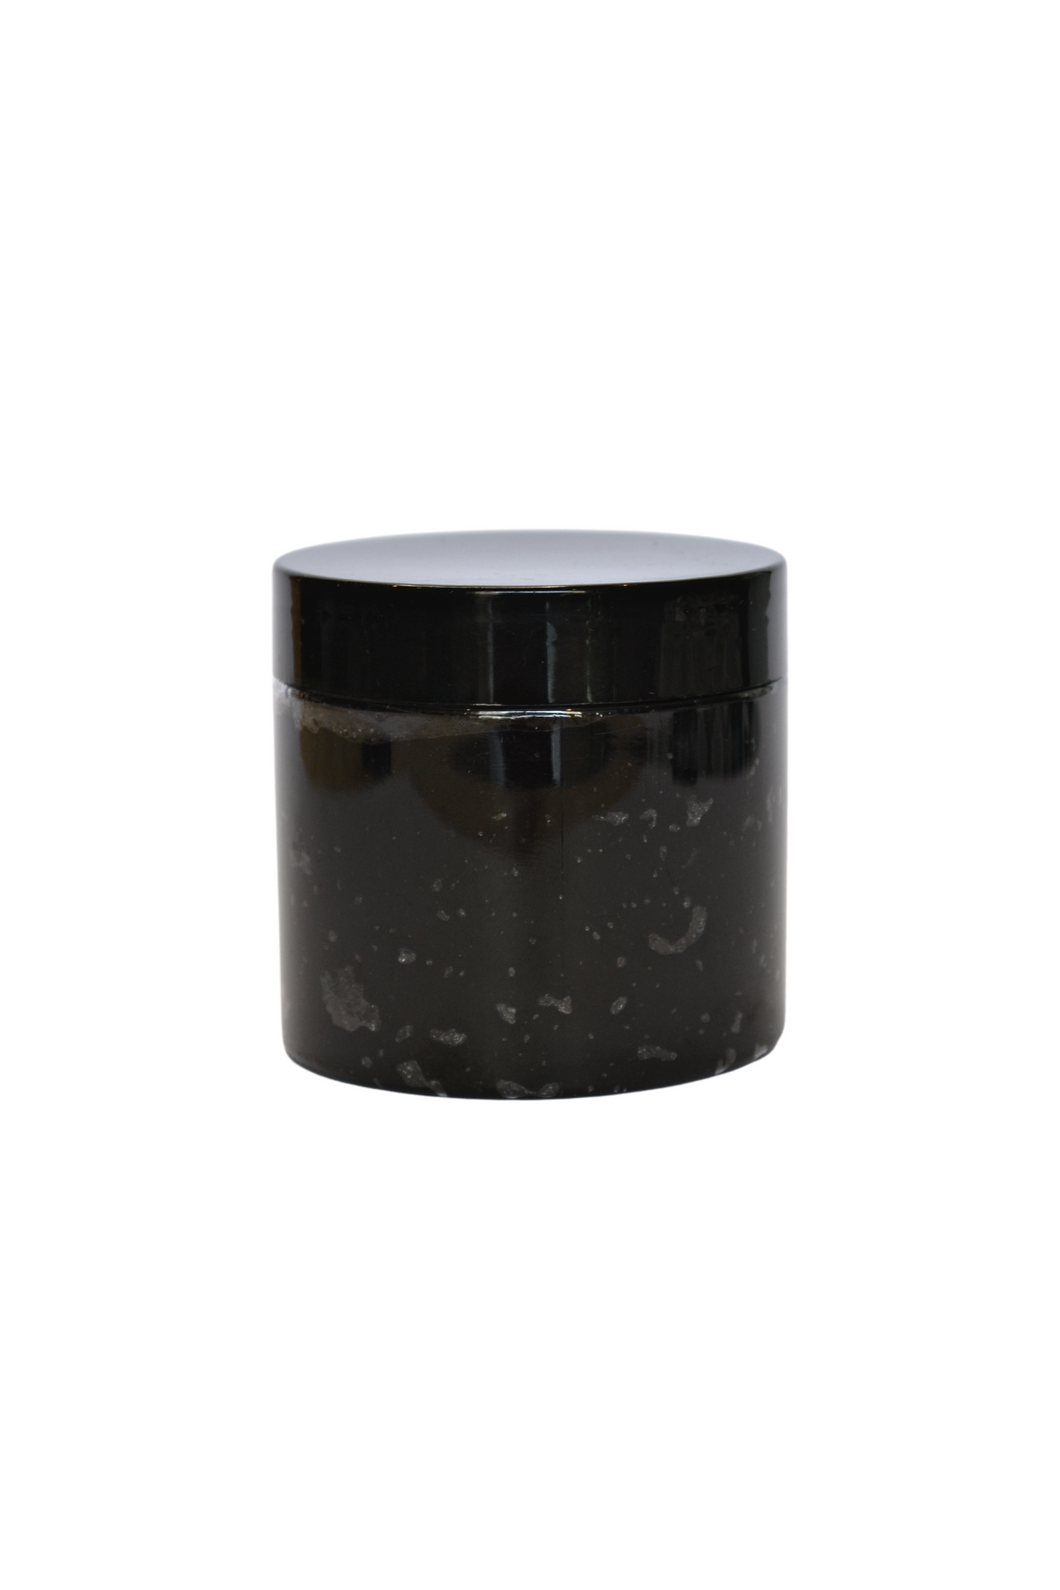 Activated charcoal detoxifying body scrub for acne